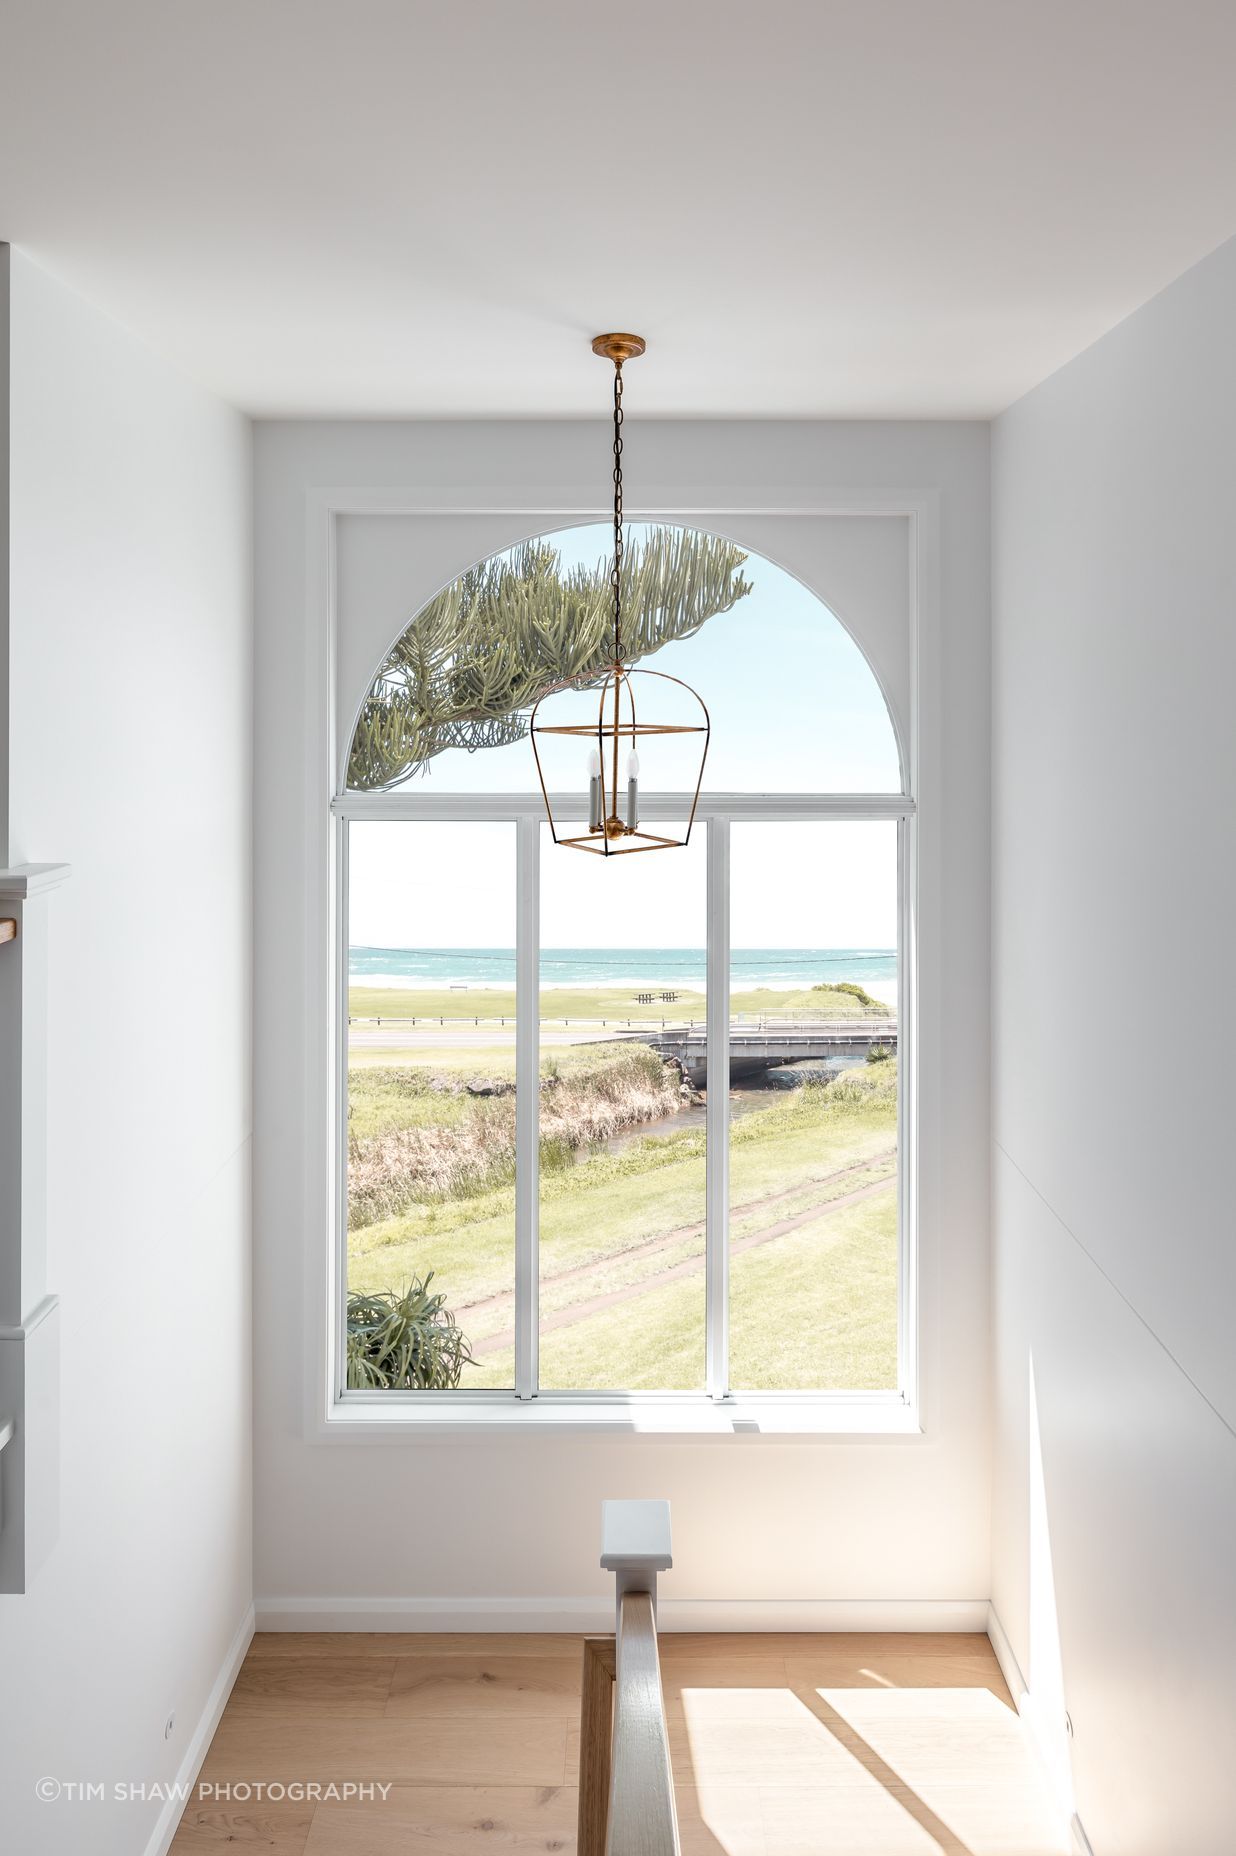 An arched stairwell window takes in the sea views.